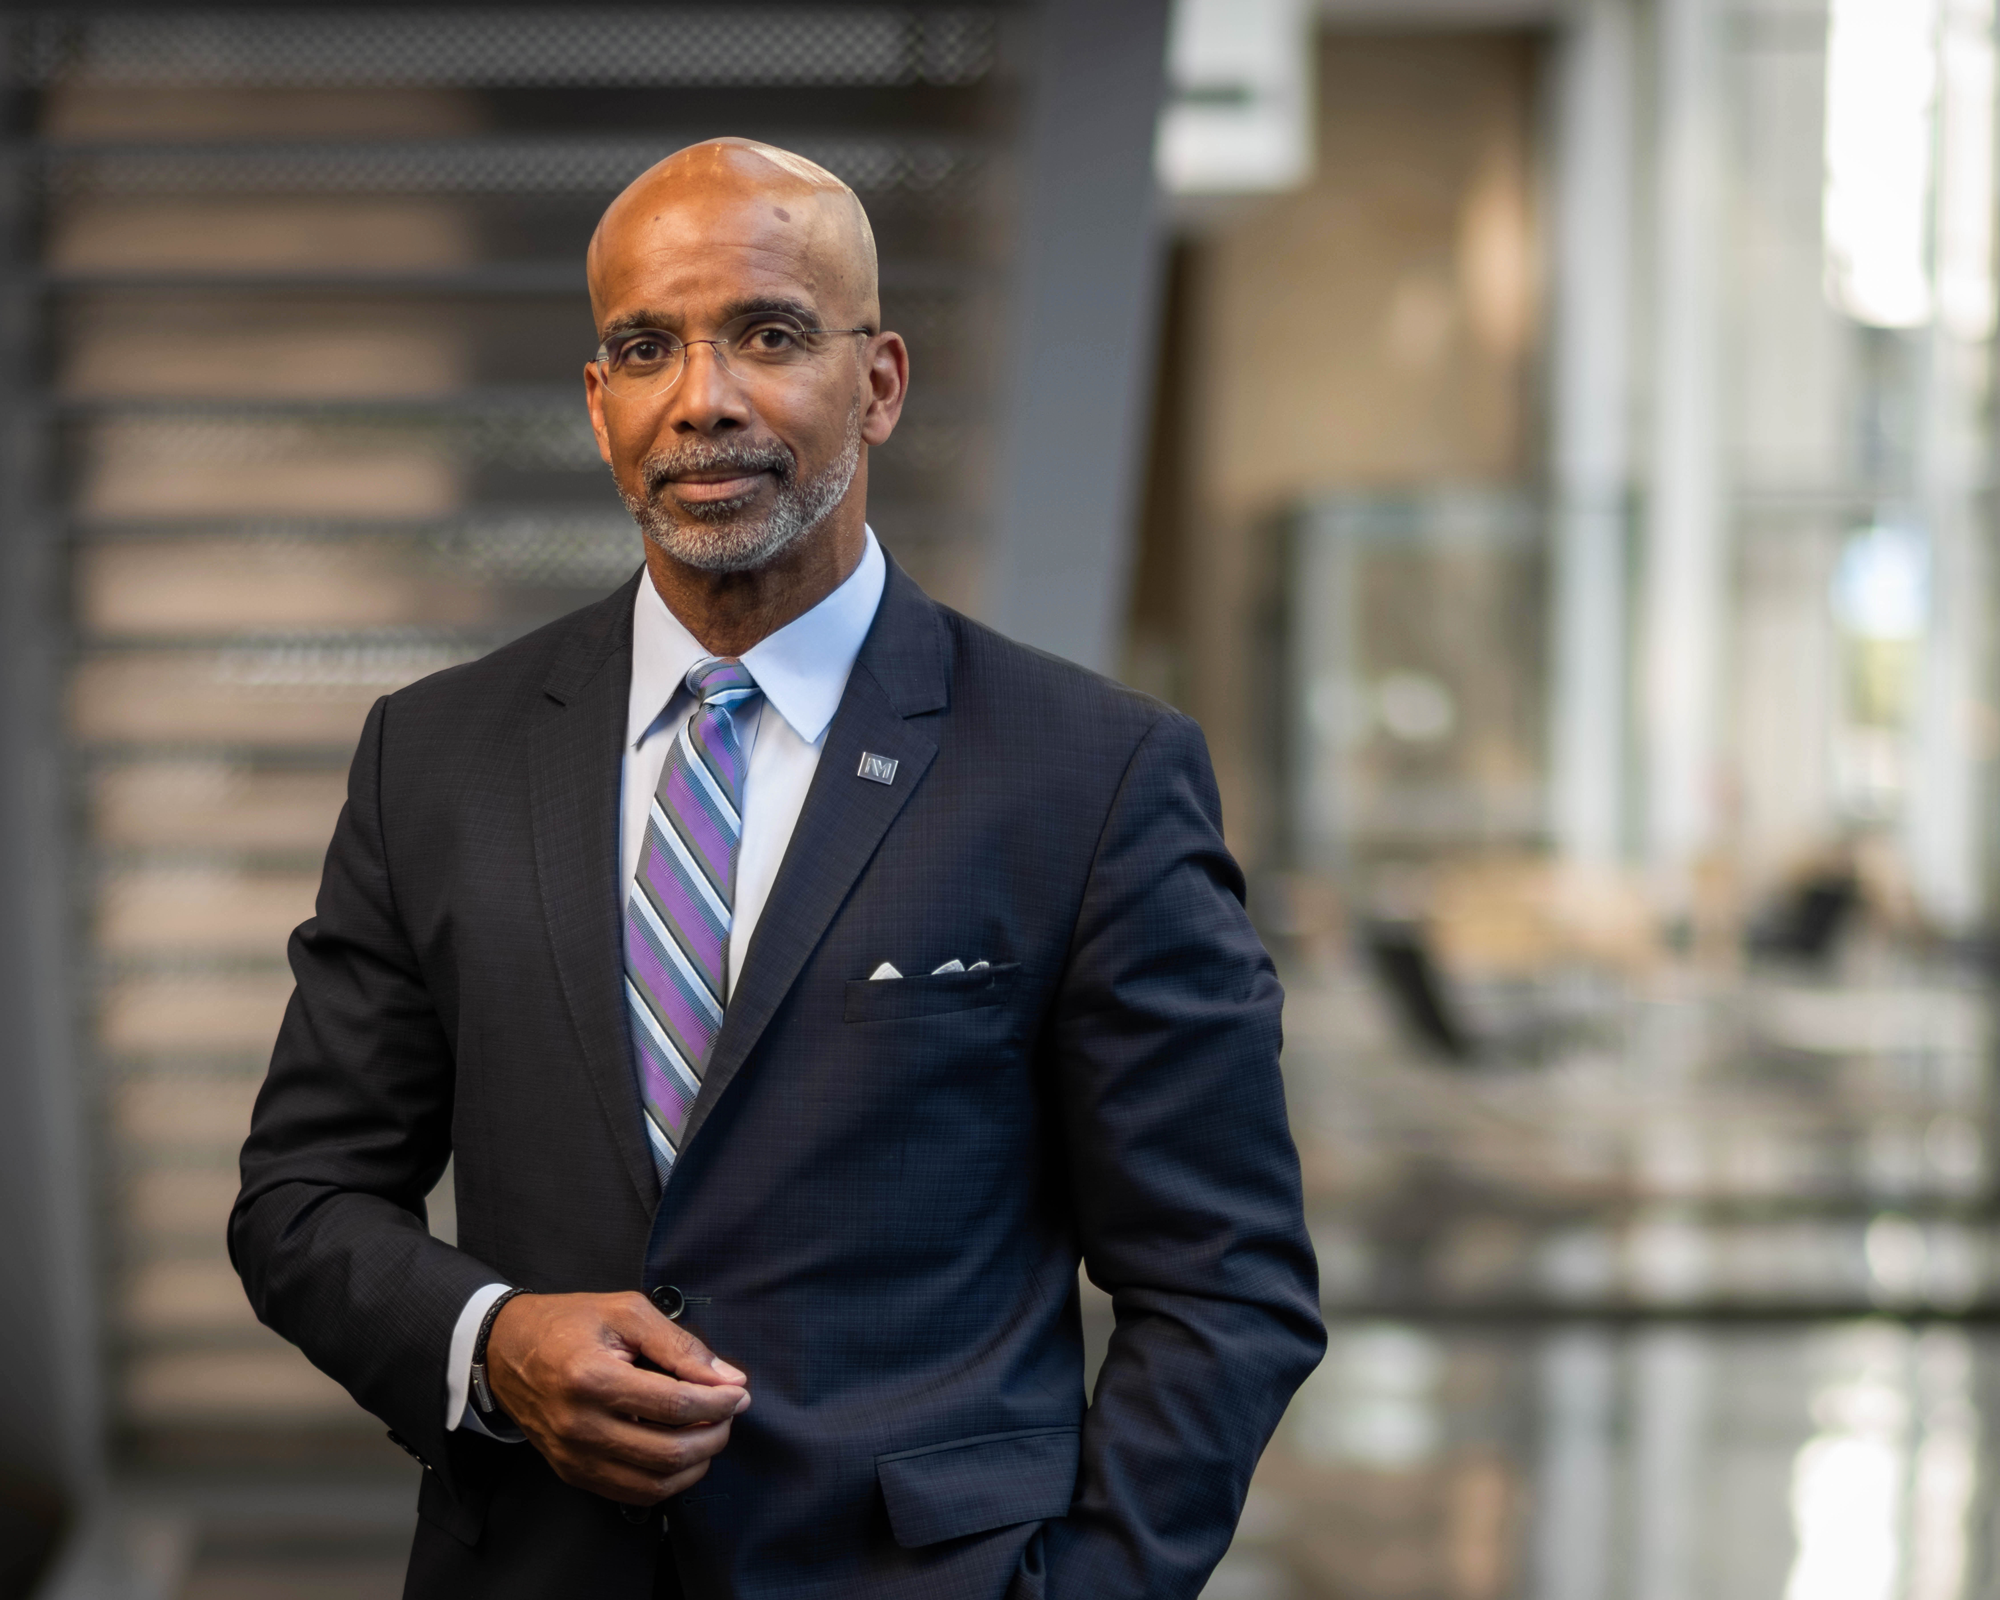 Clyde Yancy, M.D., chief of cardiology and vice dean for diversity and inclusion at Northwestern University’s Feinberg School of Medicine